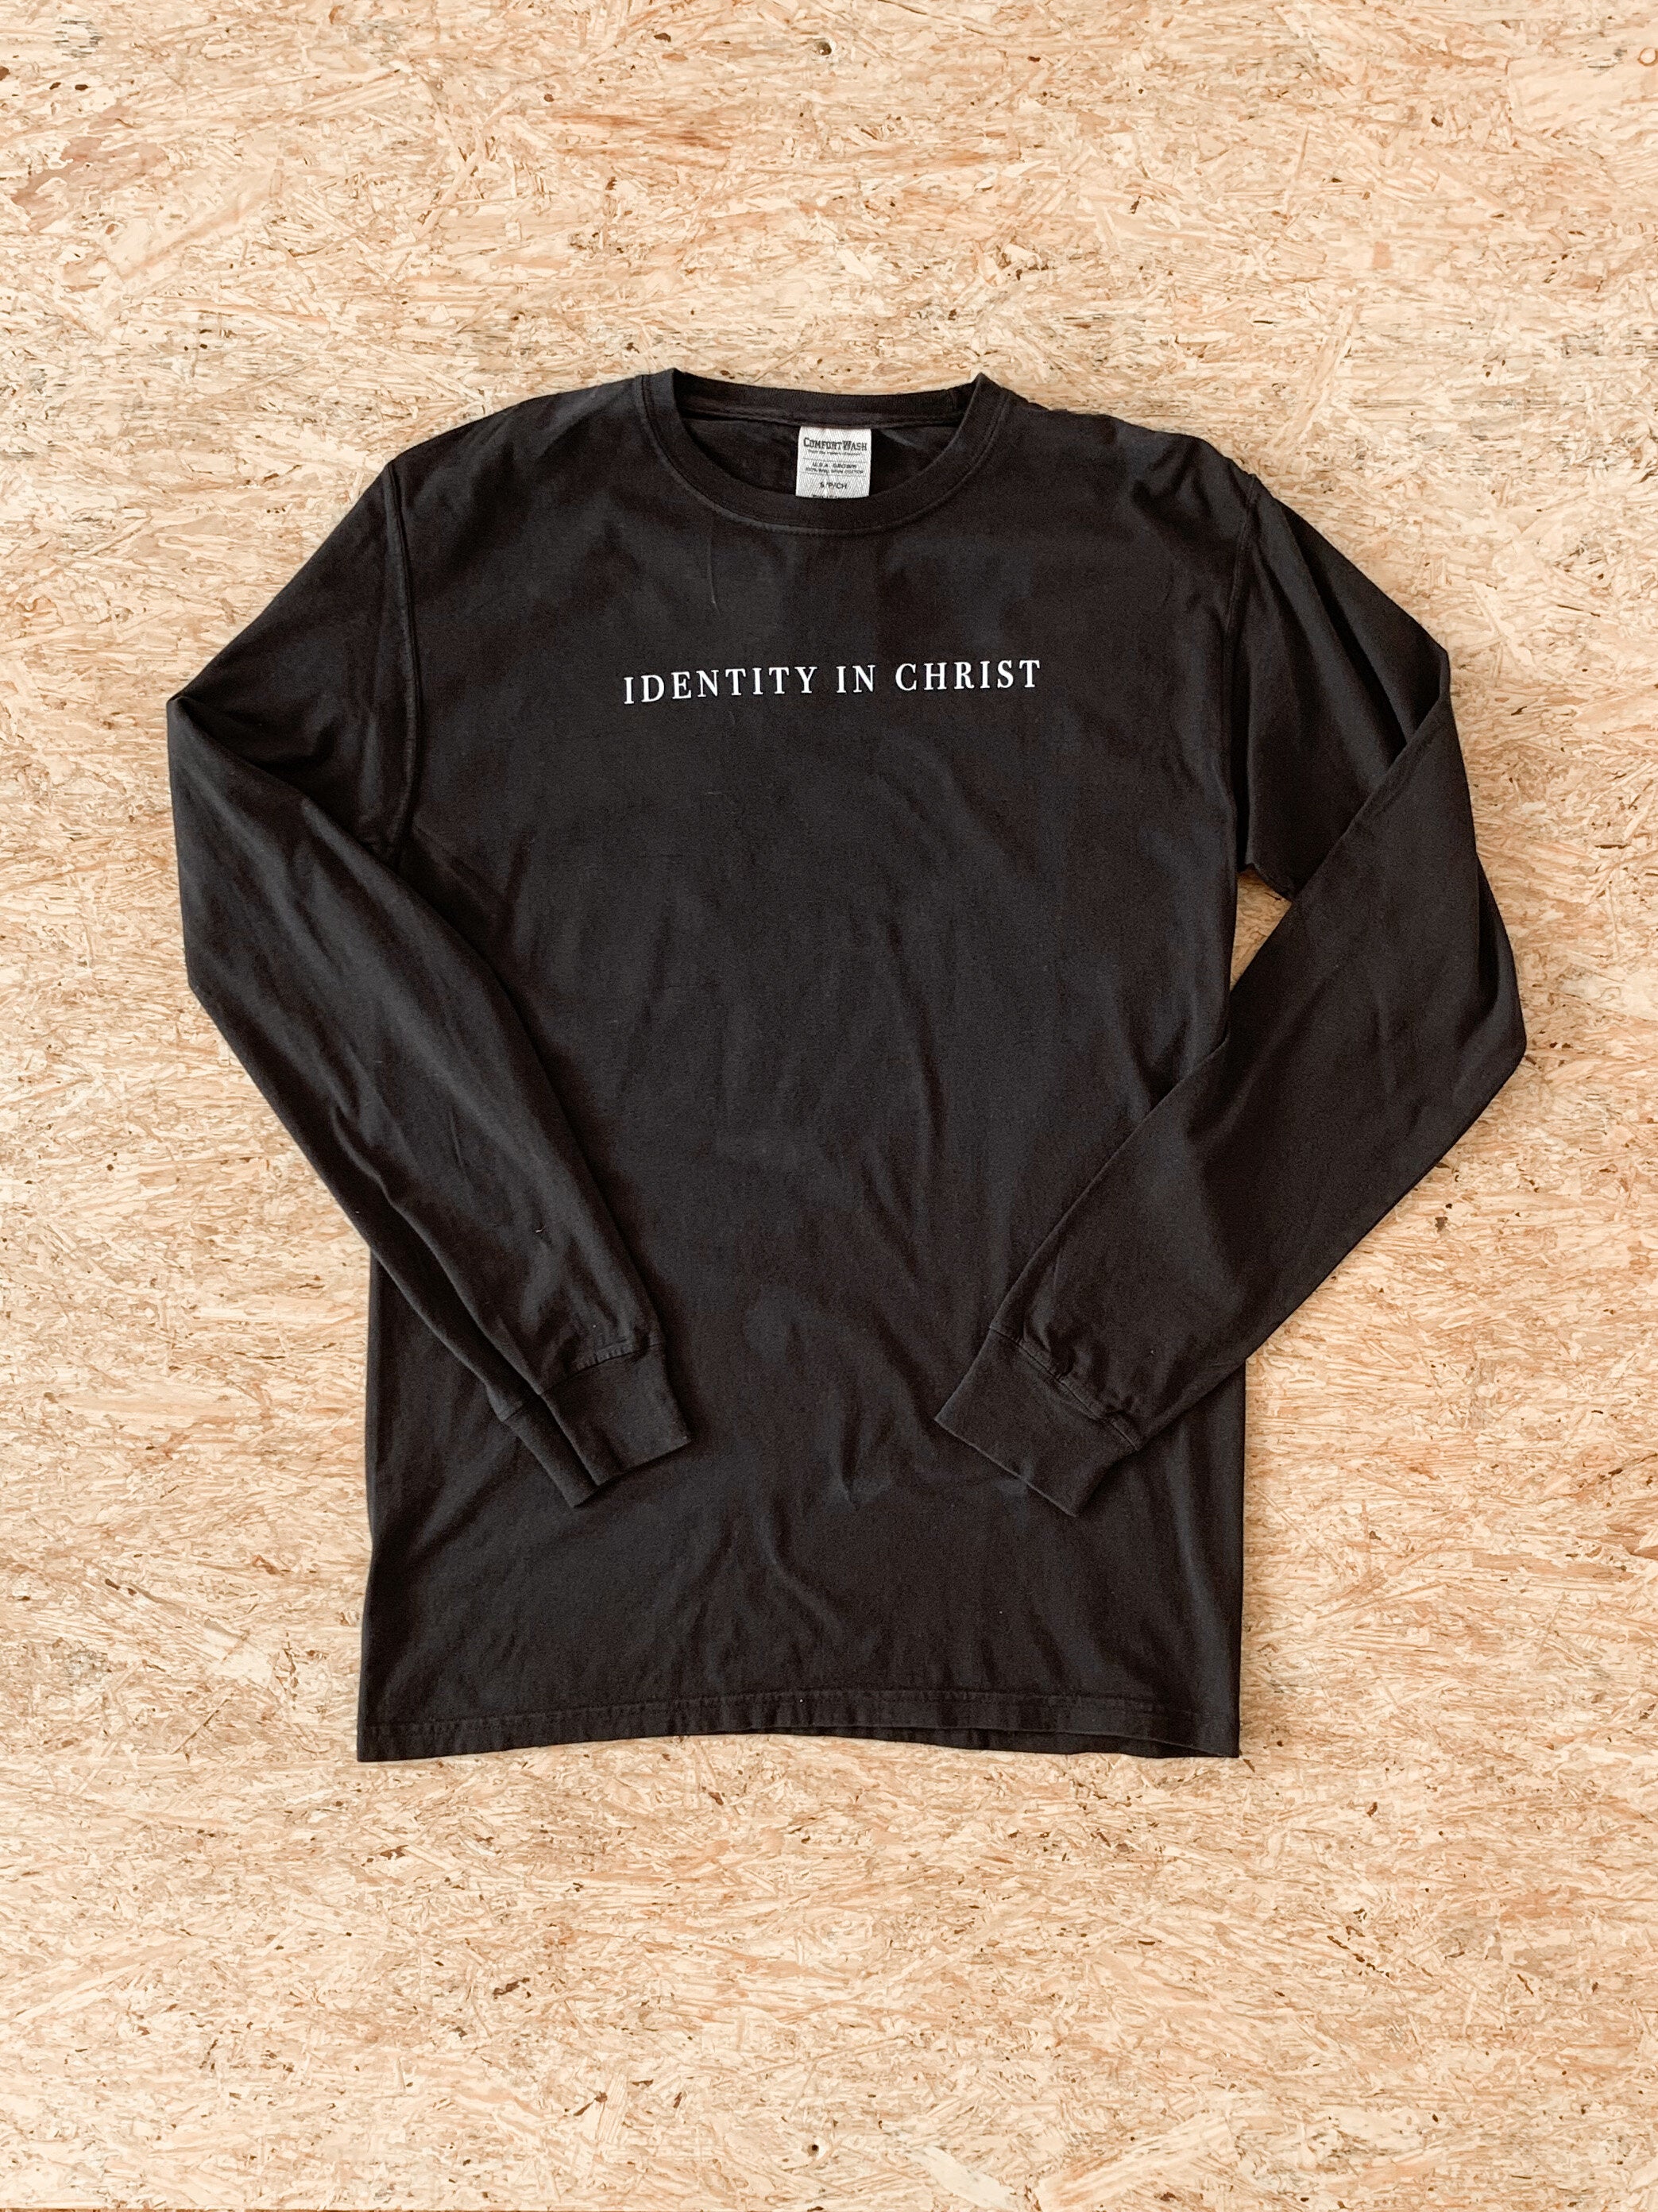 T-Shirt - LS - Small Words - Identity in Christ - Black